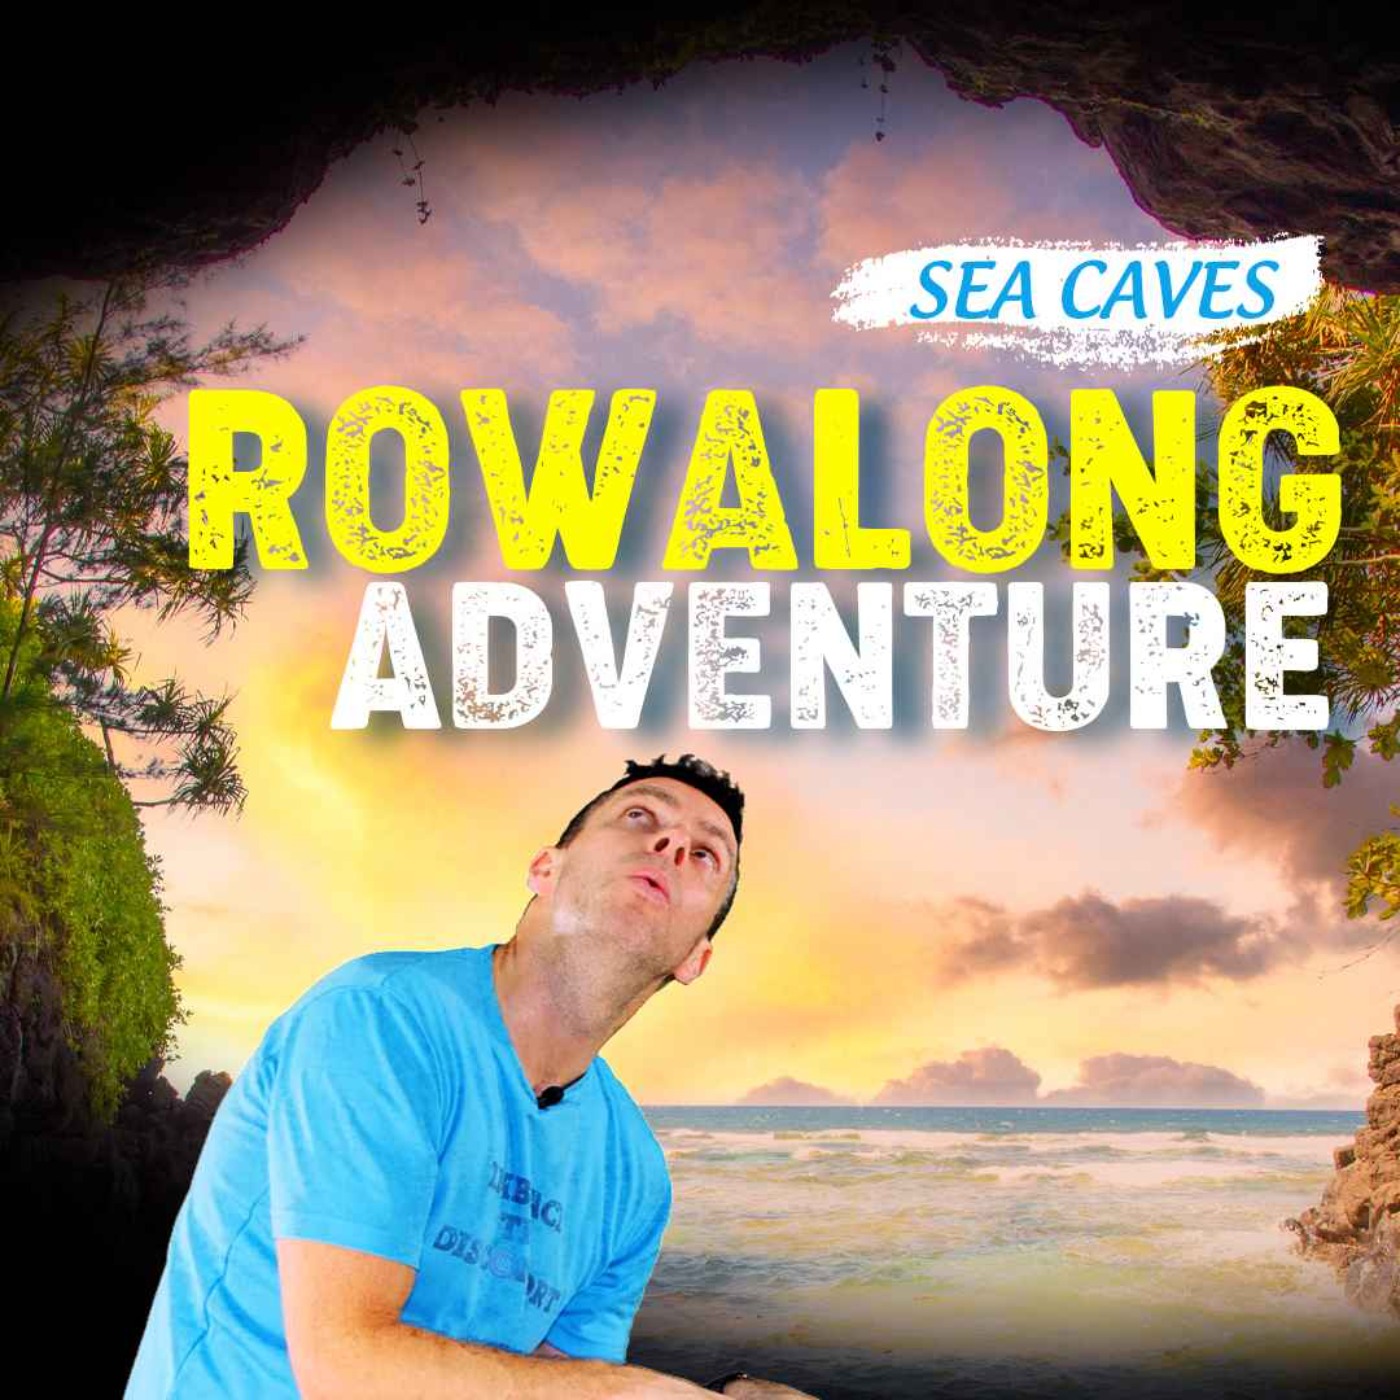 RowAlong Adventure - Can You Survive Rowing The Seacaves?